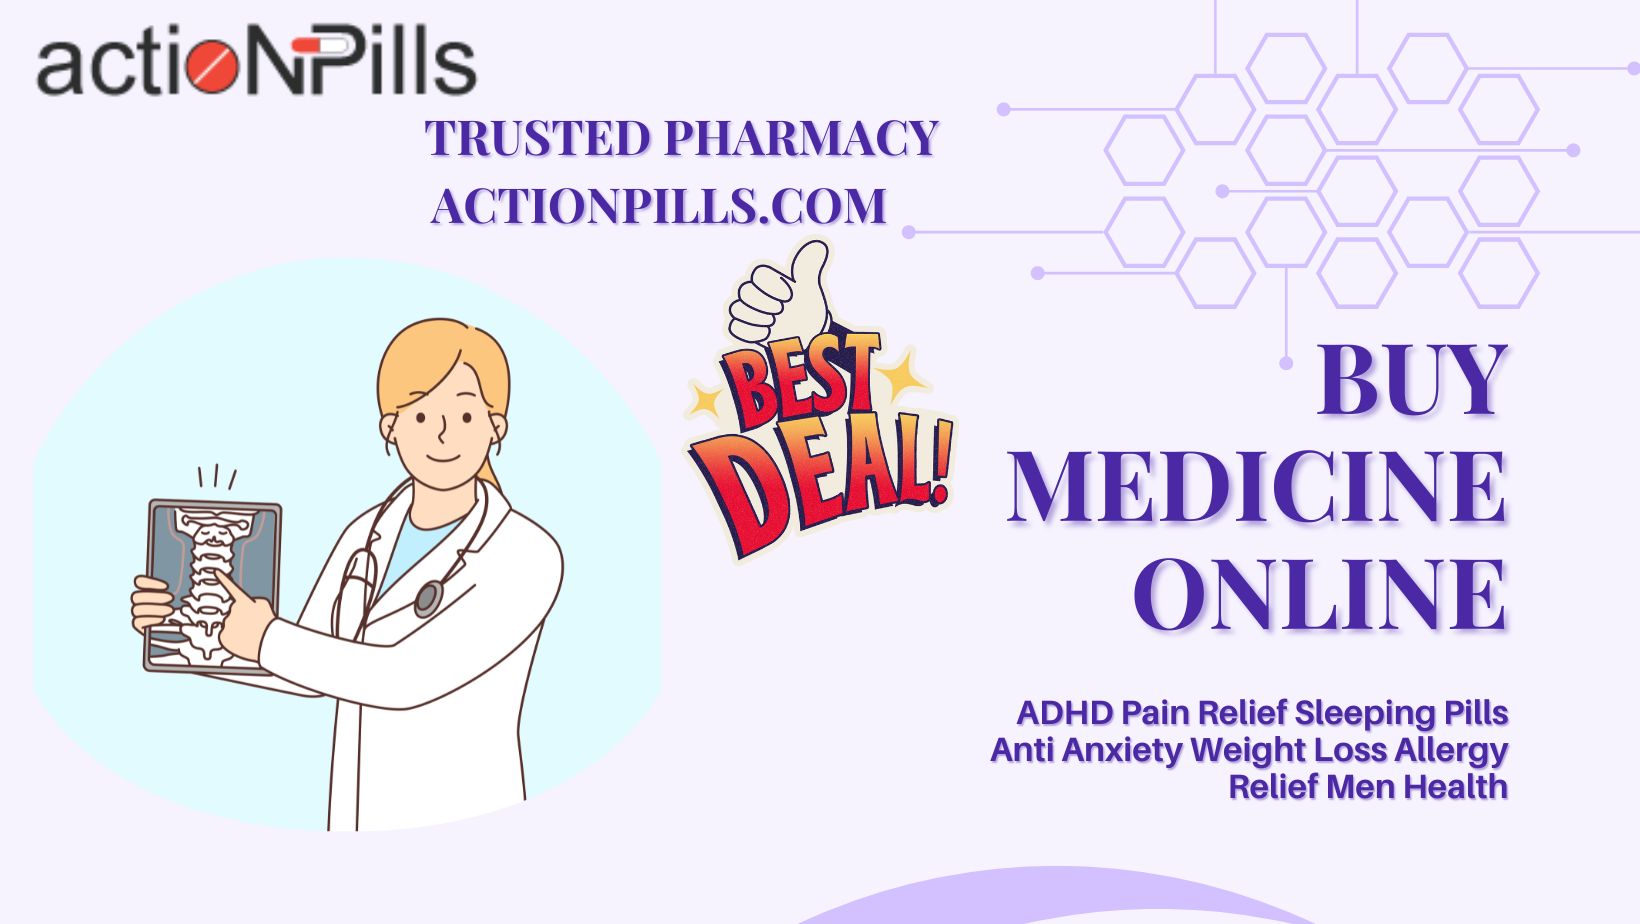 Choose The Right Place To Buy Adderall Online For *ADHD Treatment*